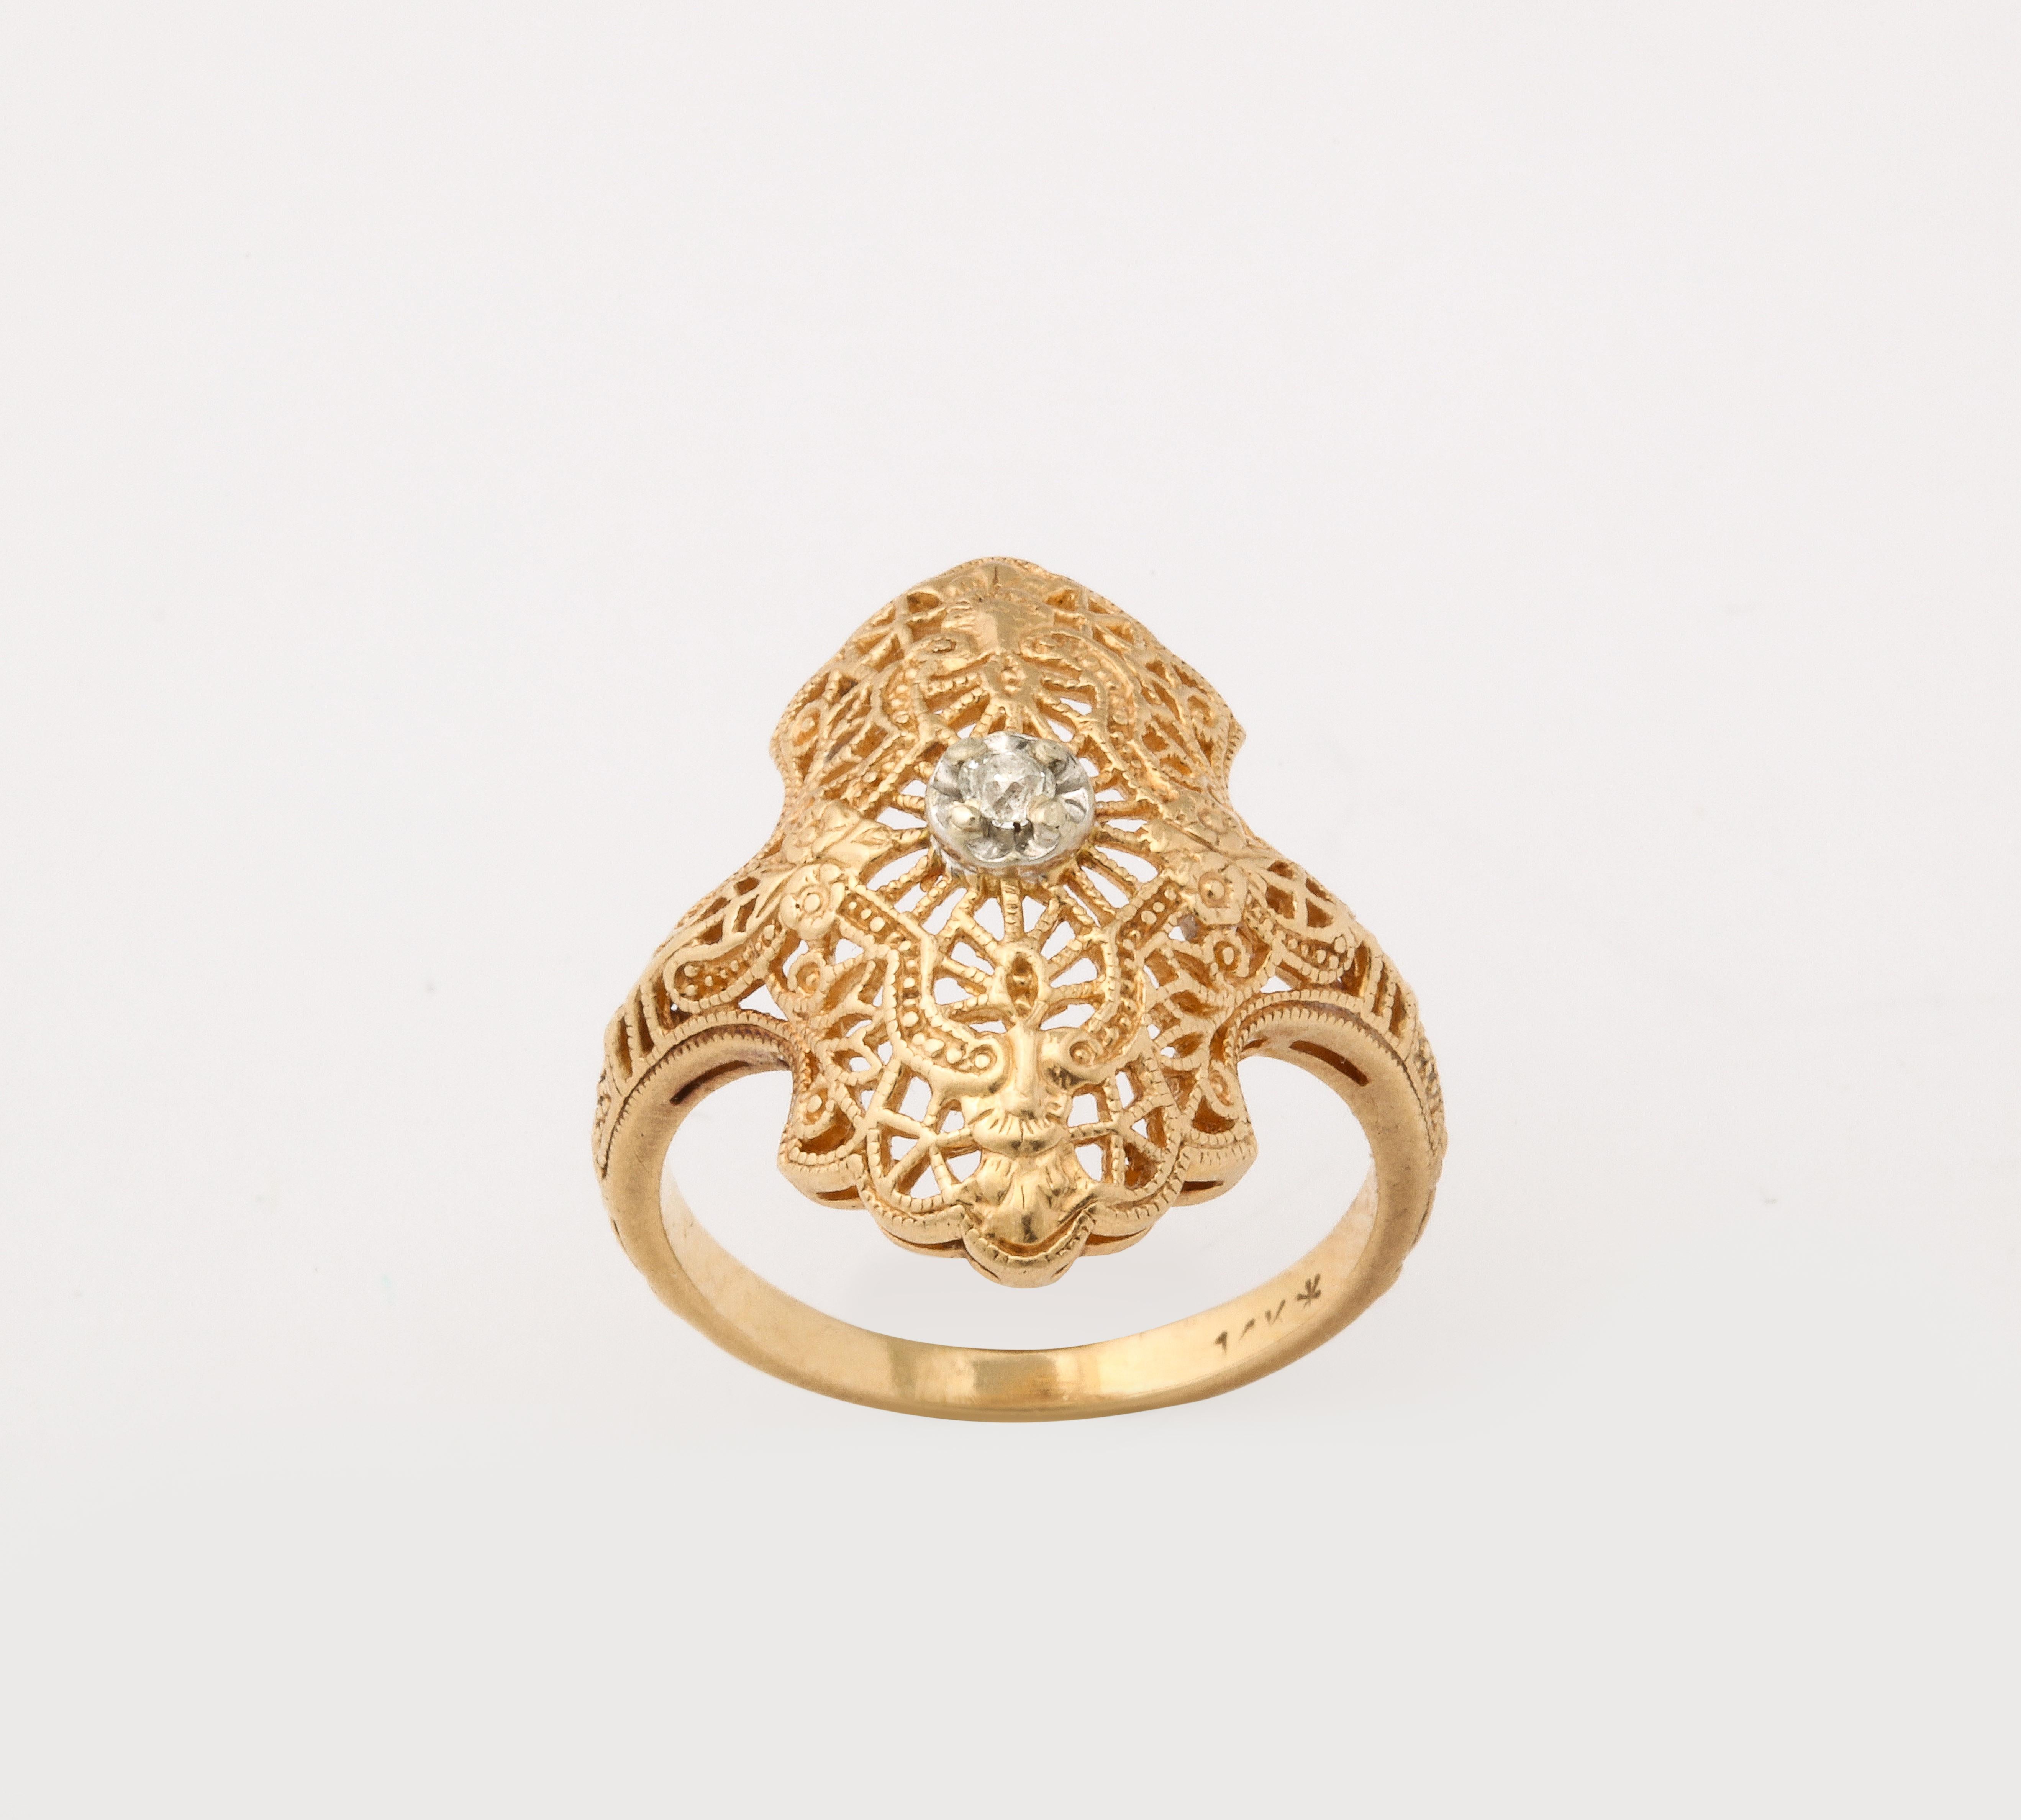 Art Deco Gold Diamond Filigree Ring  In Excellent Condition For Sale In Stamford, CT